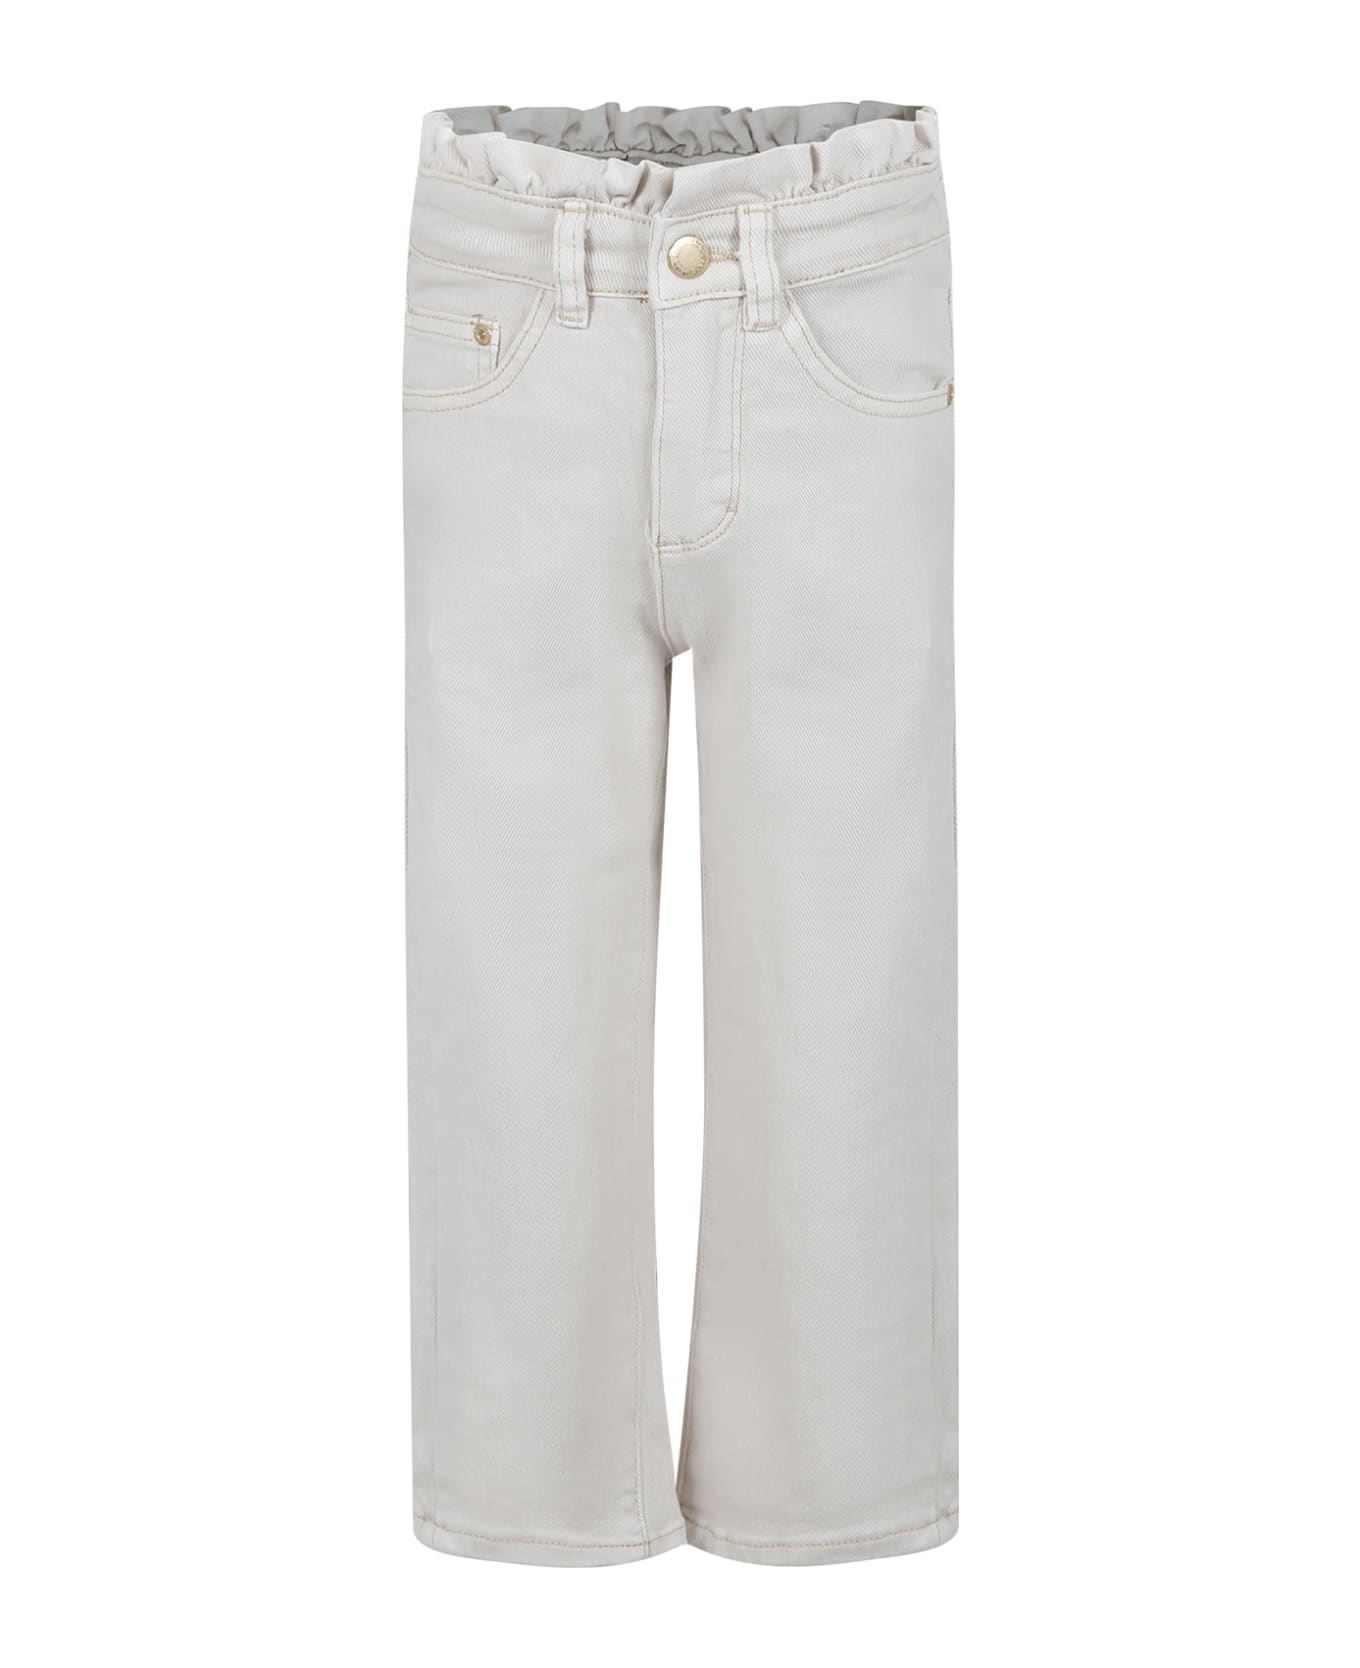 Molo Ivory Jeans For Kids - Ivory